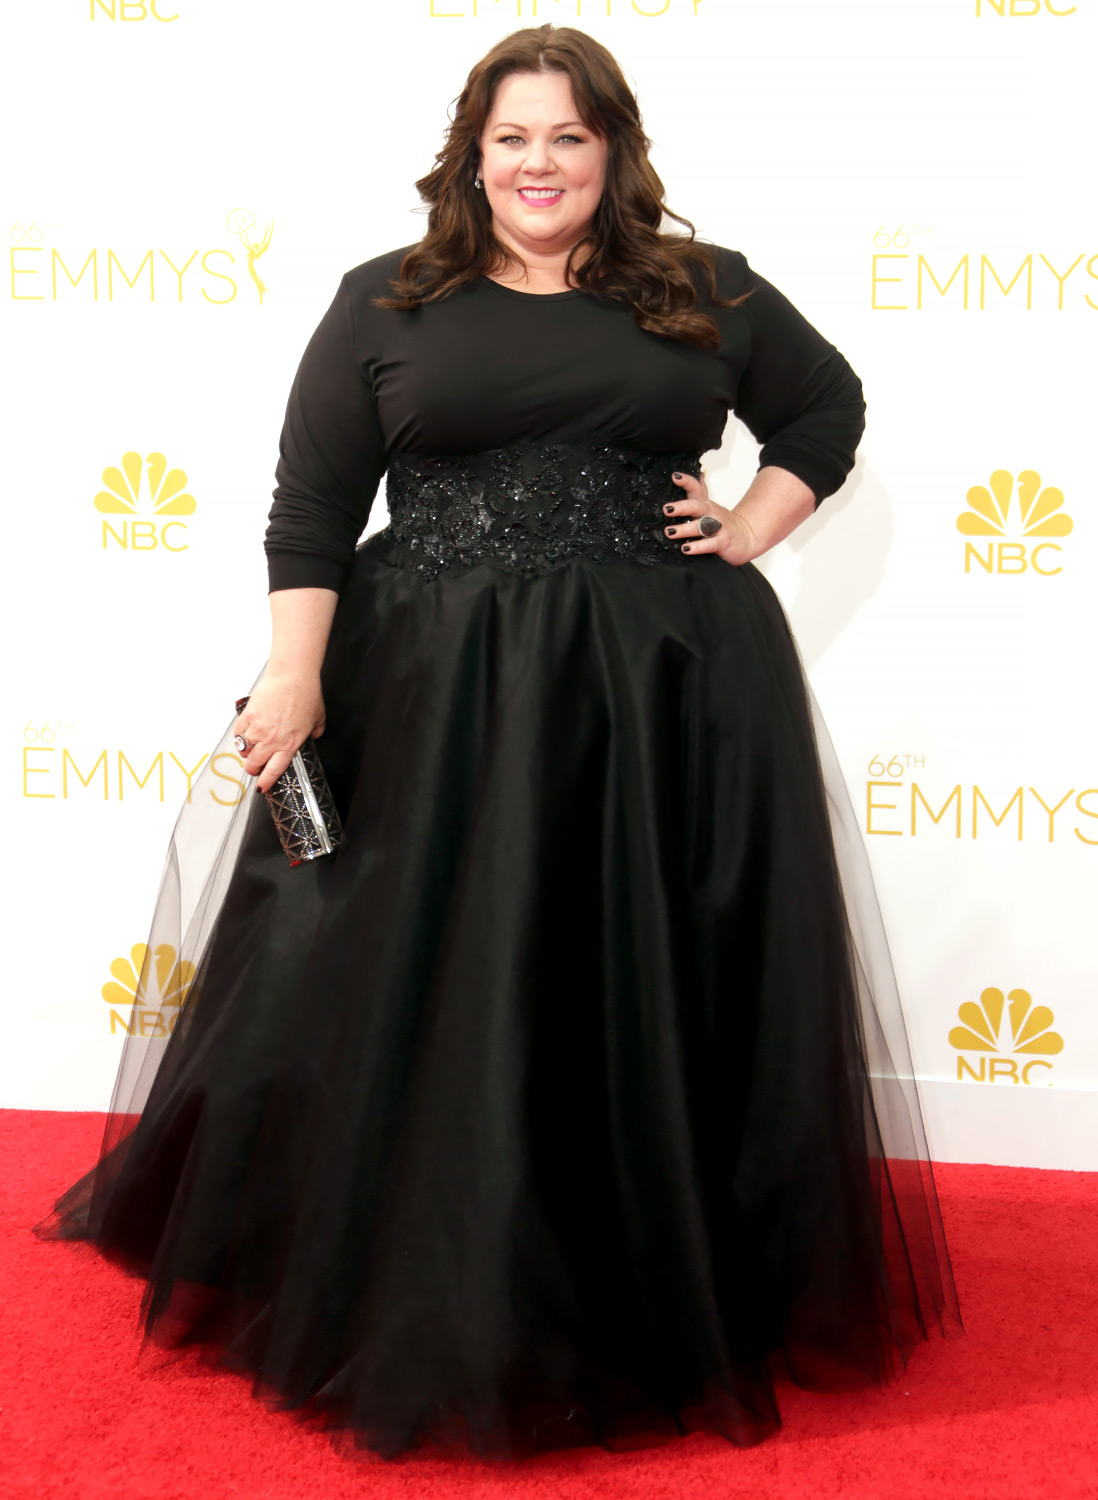  Melissa McCartney in Marchesa at the Emmys 